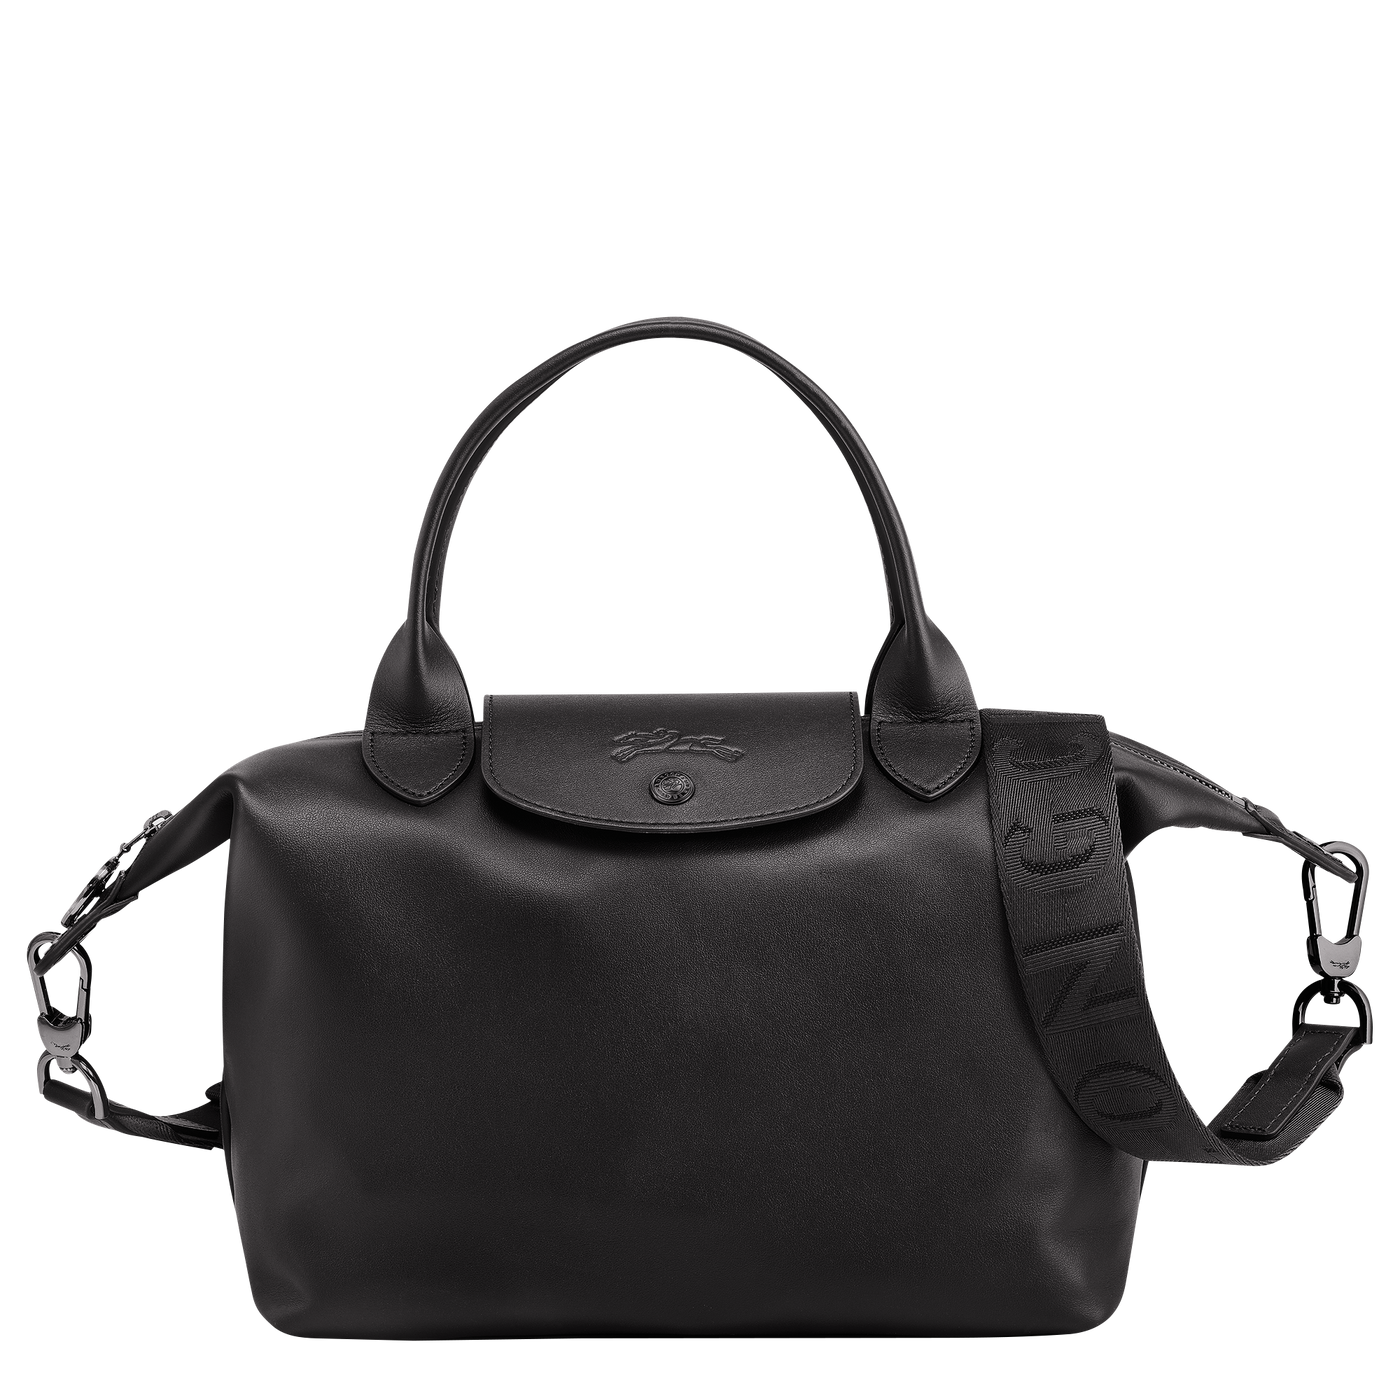 Shop The Latest Collection Of Longchamp Le Pliage Xtra Top Handle Bag S - L1512987 In Lebanon